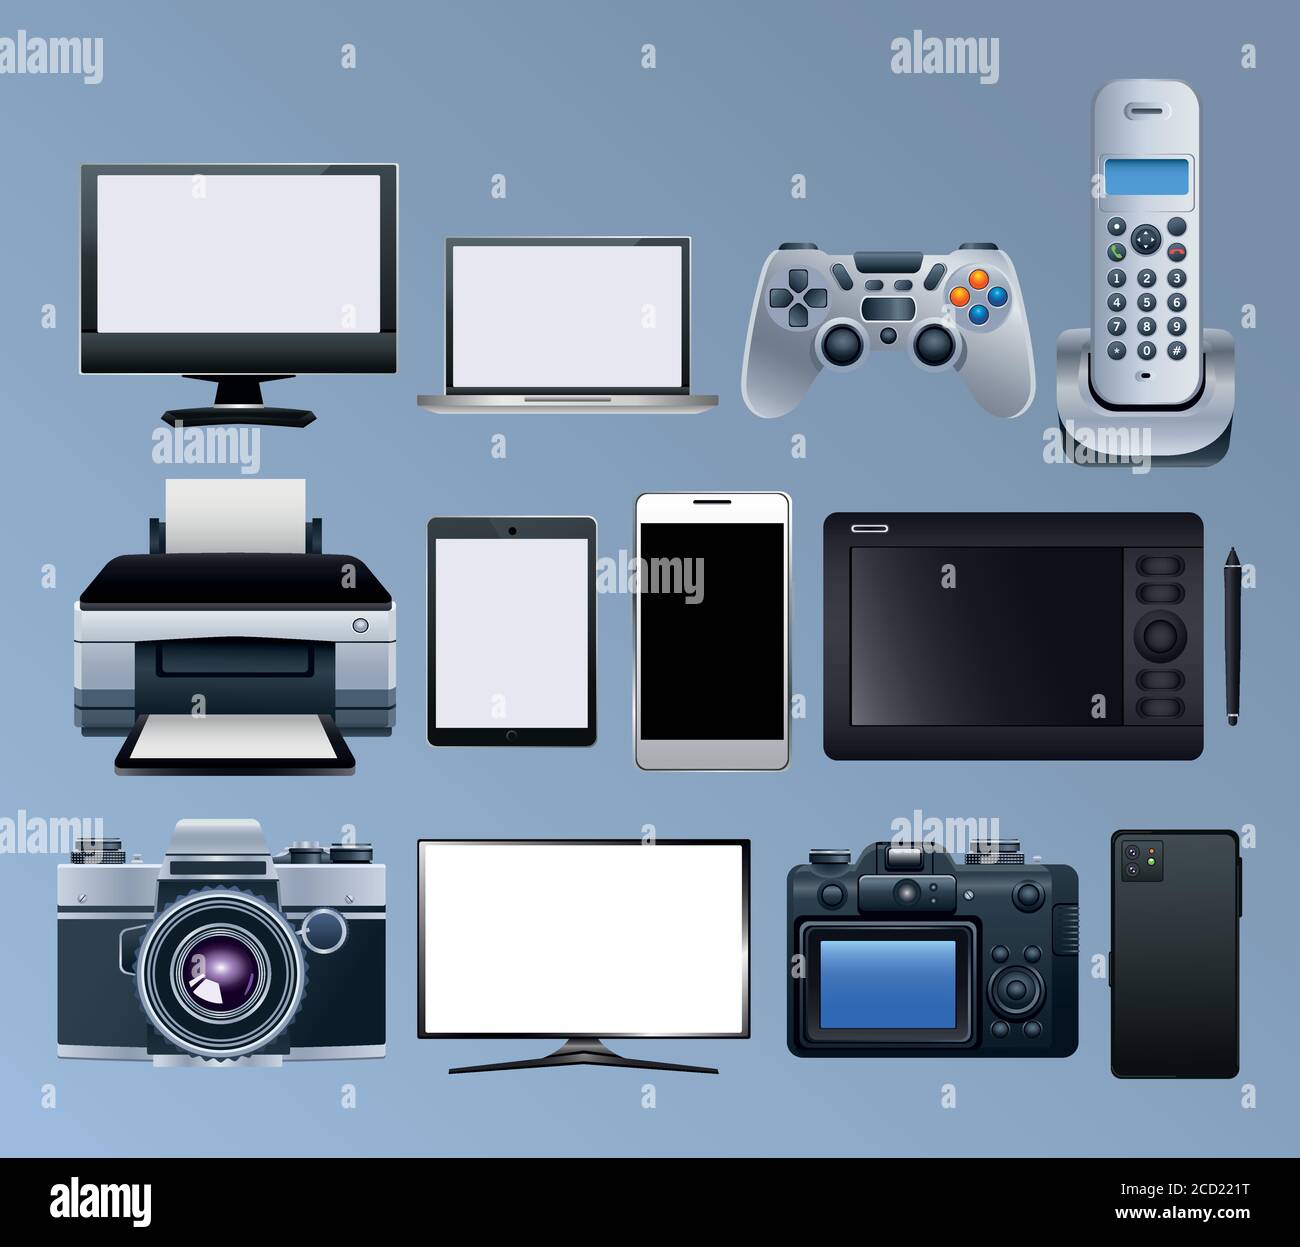 group of electronic devices set icons vector illustration design Stock Vector